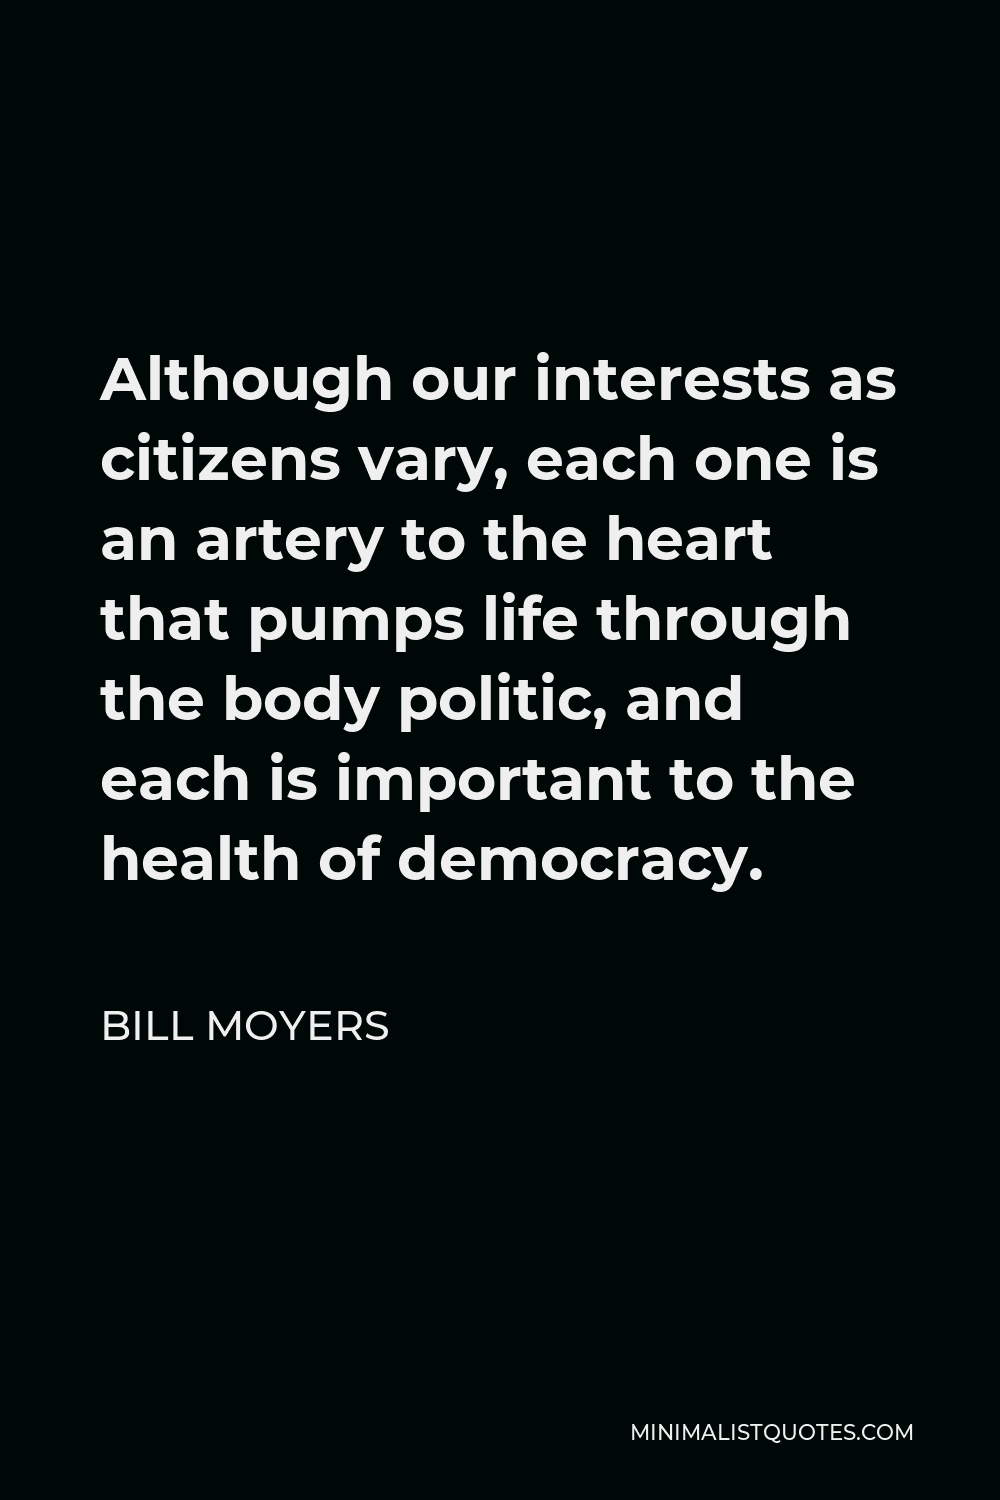 Bill Moyers Quote - Although our interests as citizens vary, each one is an artery to the heart that pumps life through the body politic, and each is important to the health of democracy.